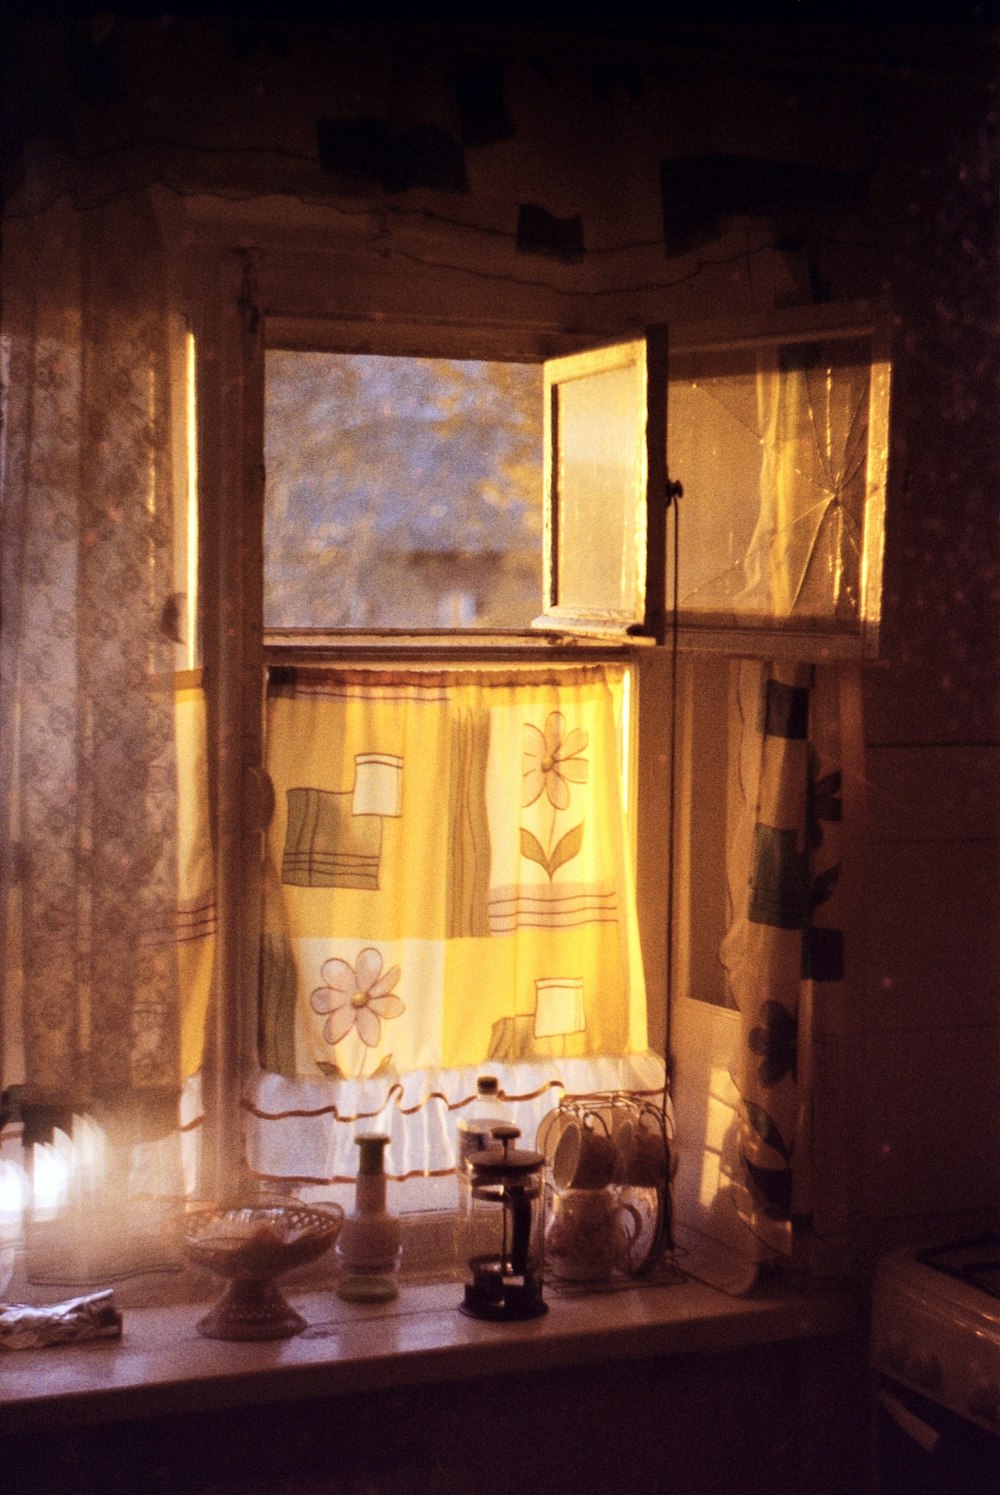 a kitchen window with yellow curtains and dishes on the counter